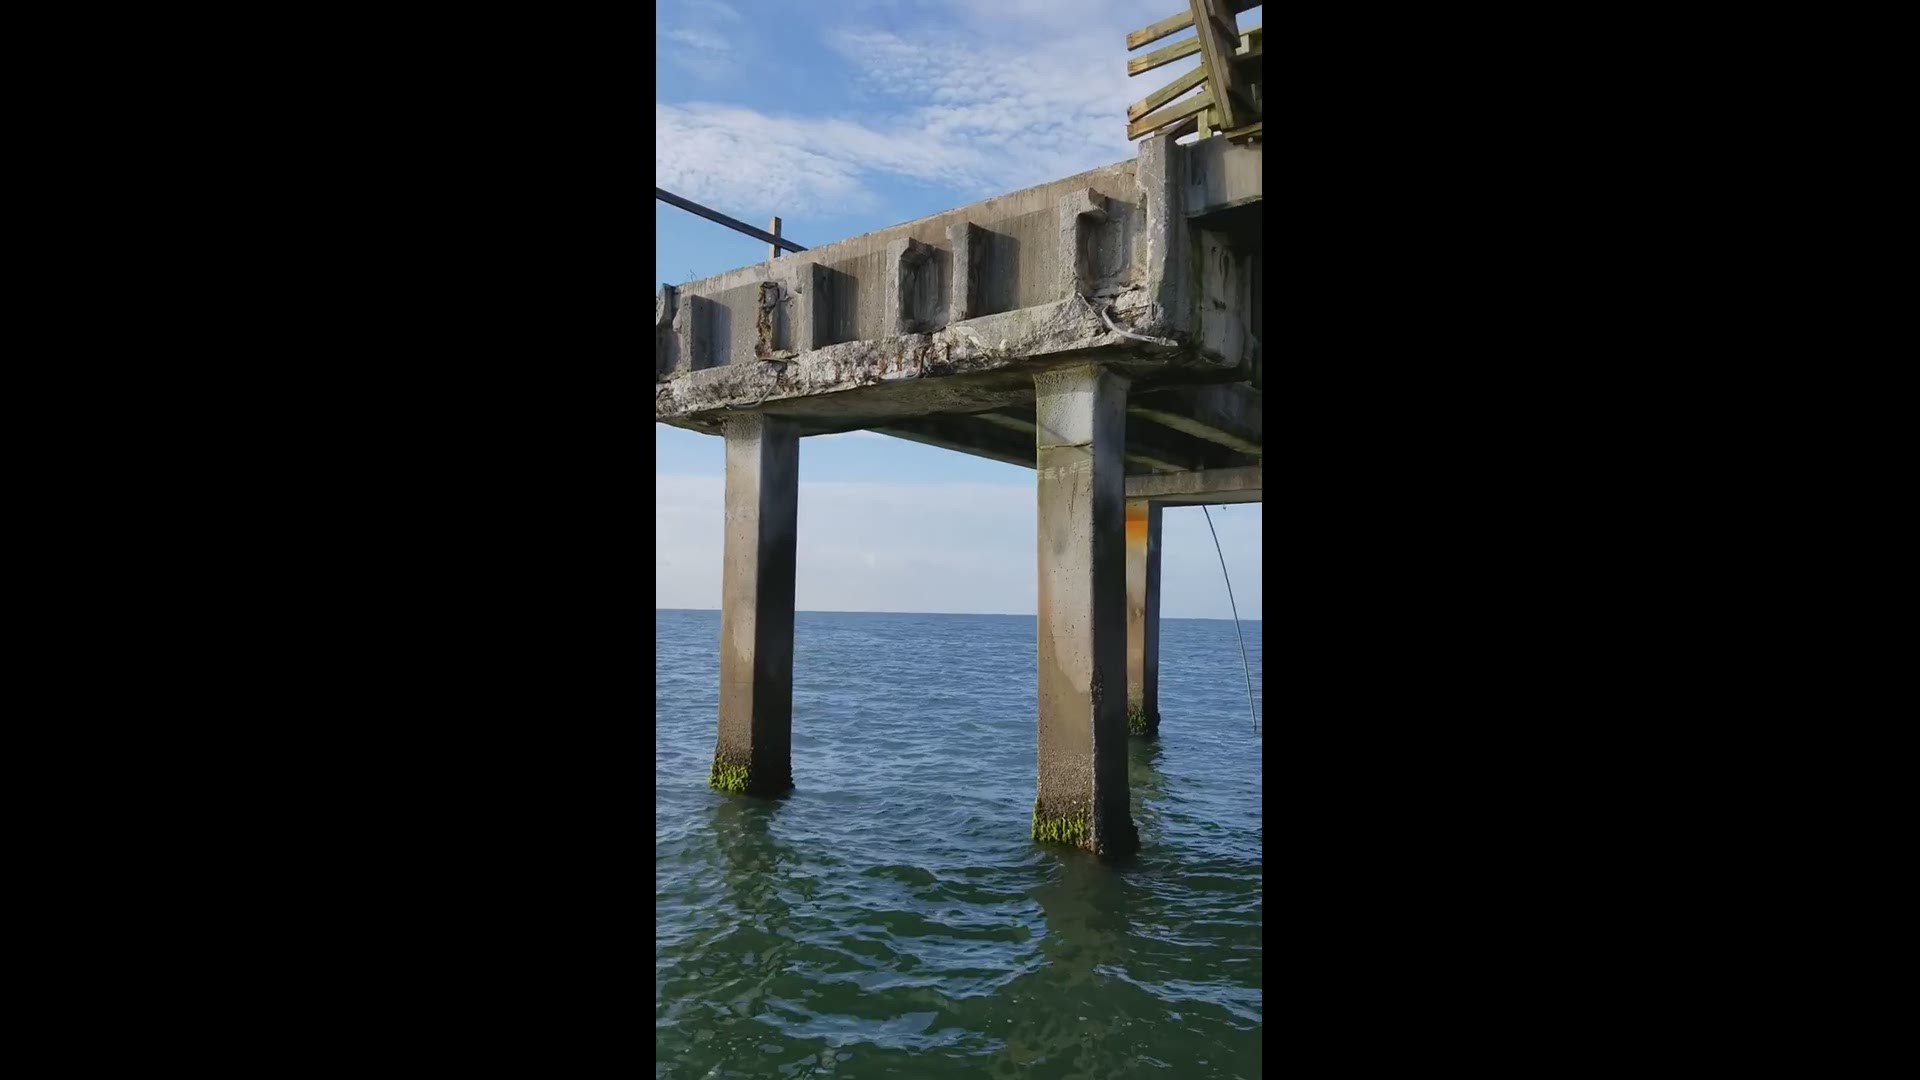 On Sunday morning, firefighters with Nueces County ESD #2 and Nueces County Parks and engineers surveyed Hurricane Hanna's damage to Bob Hall Pier.